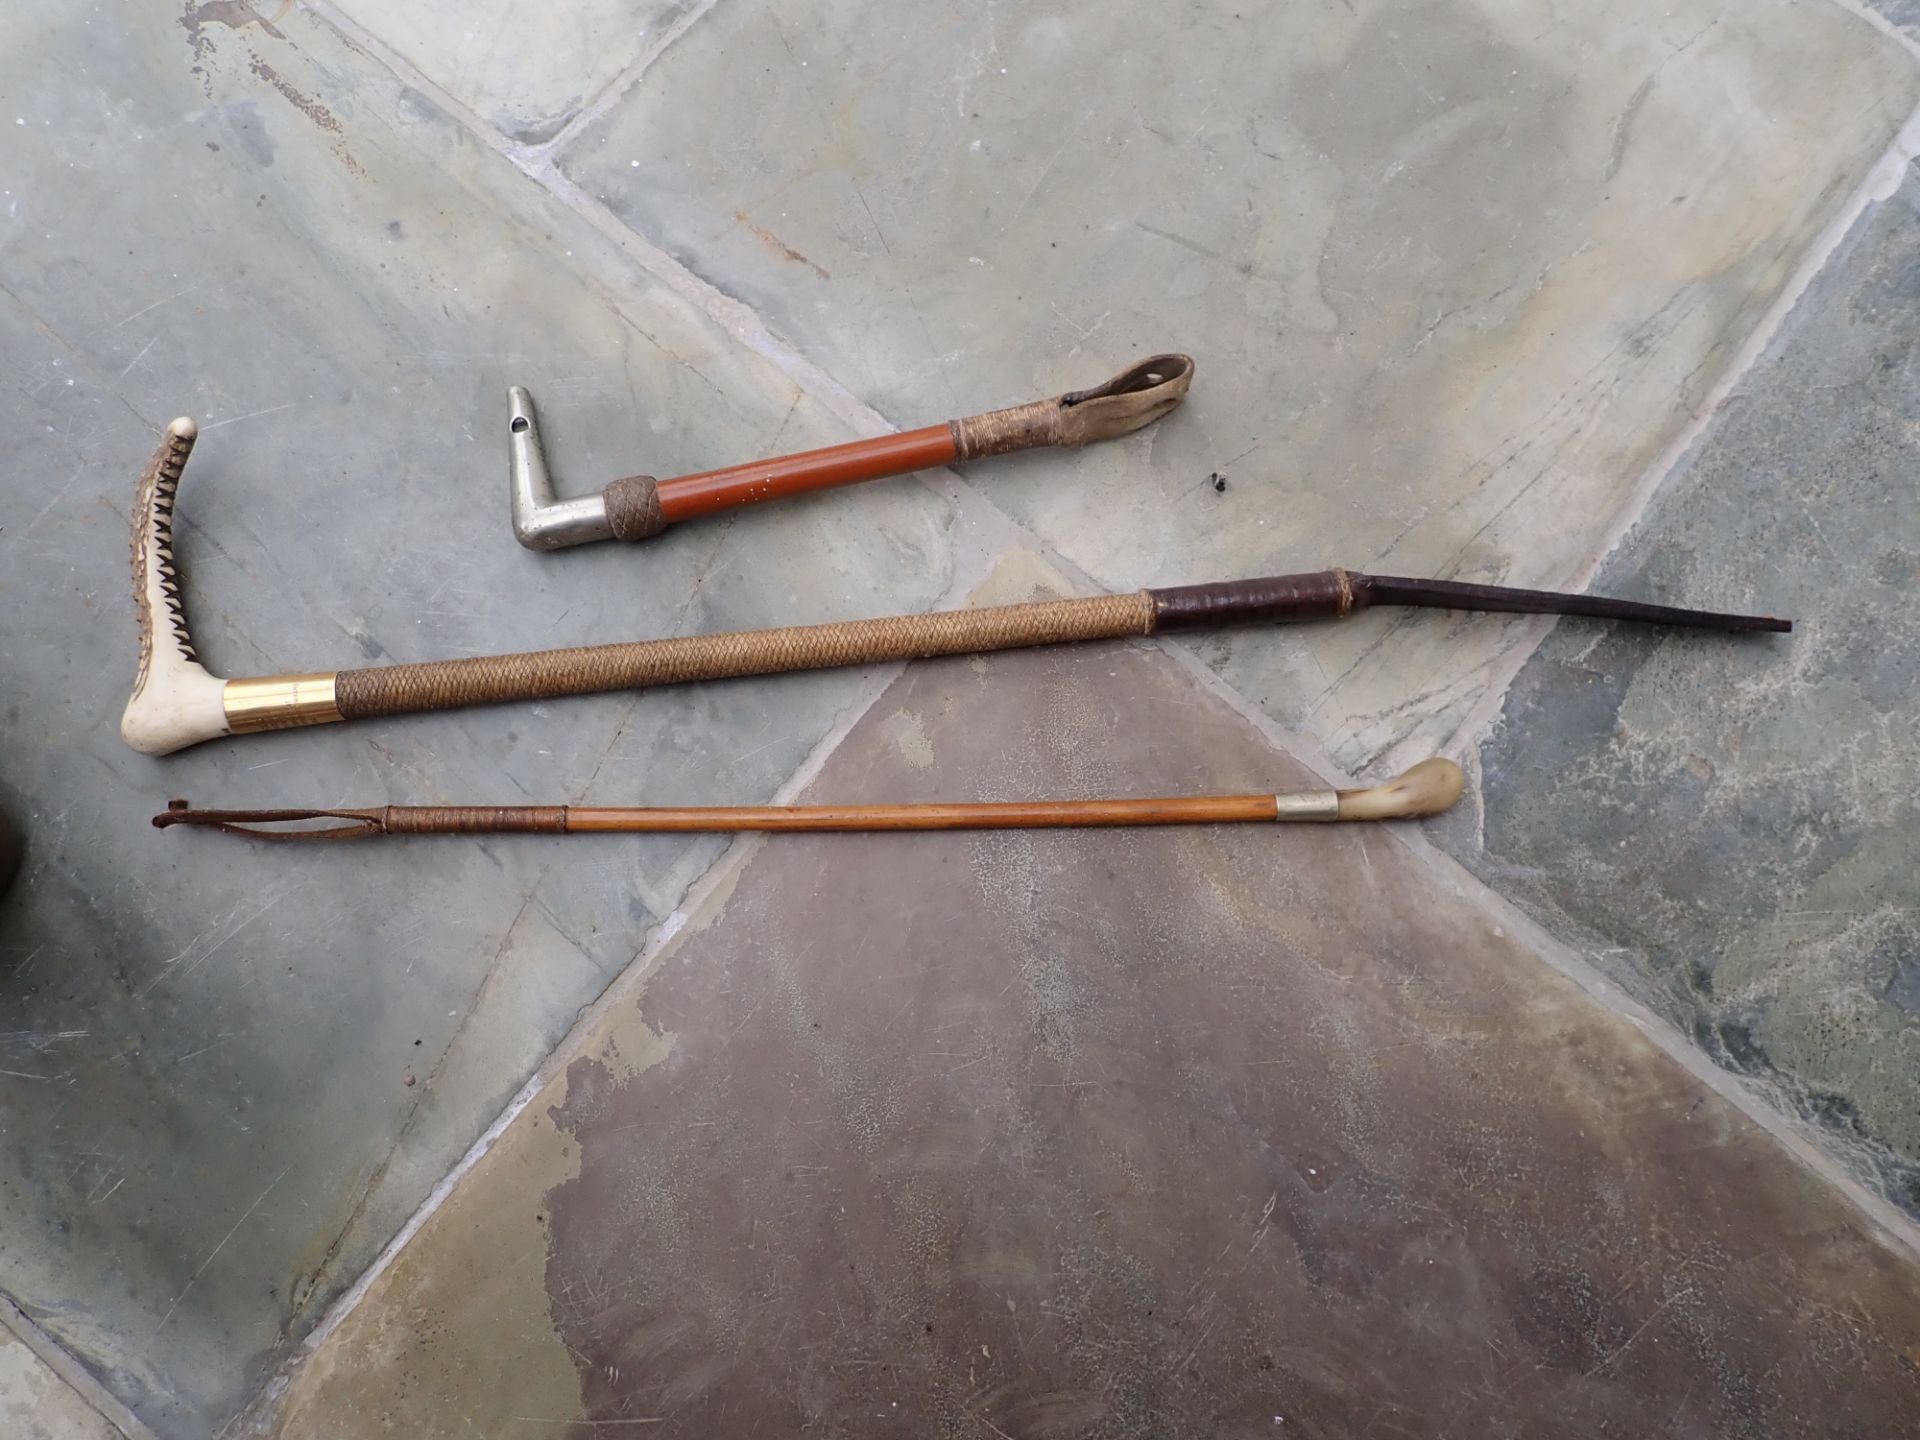 Hunting whip by Brigg; Vintage lady's whip by Swayne and a small whistle whip.